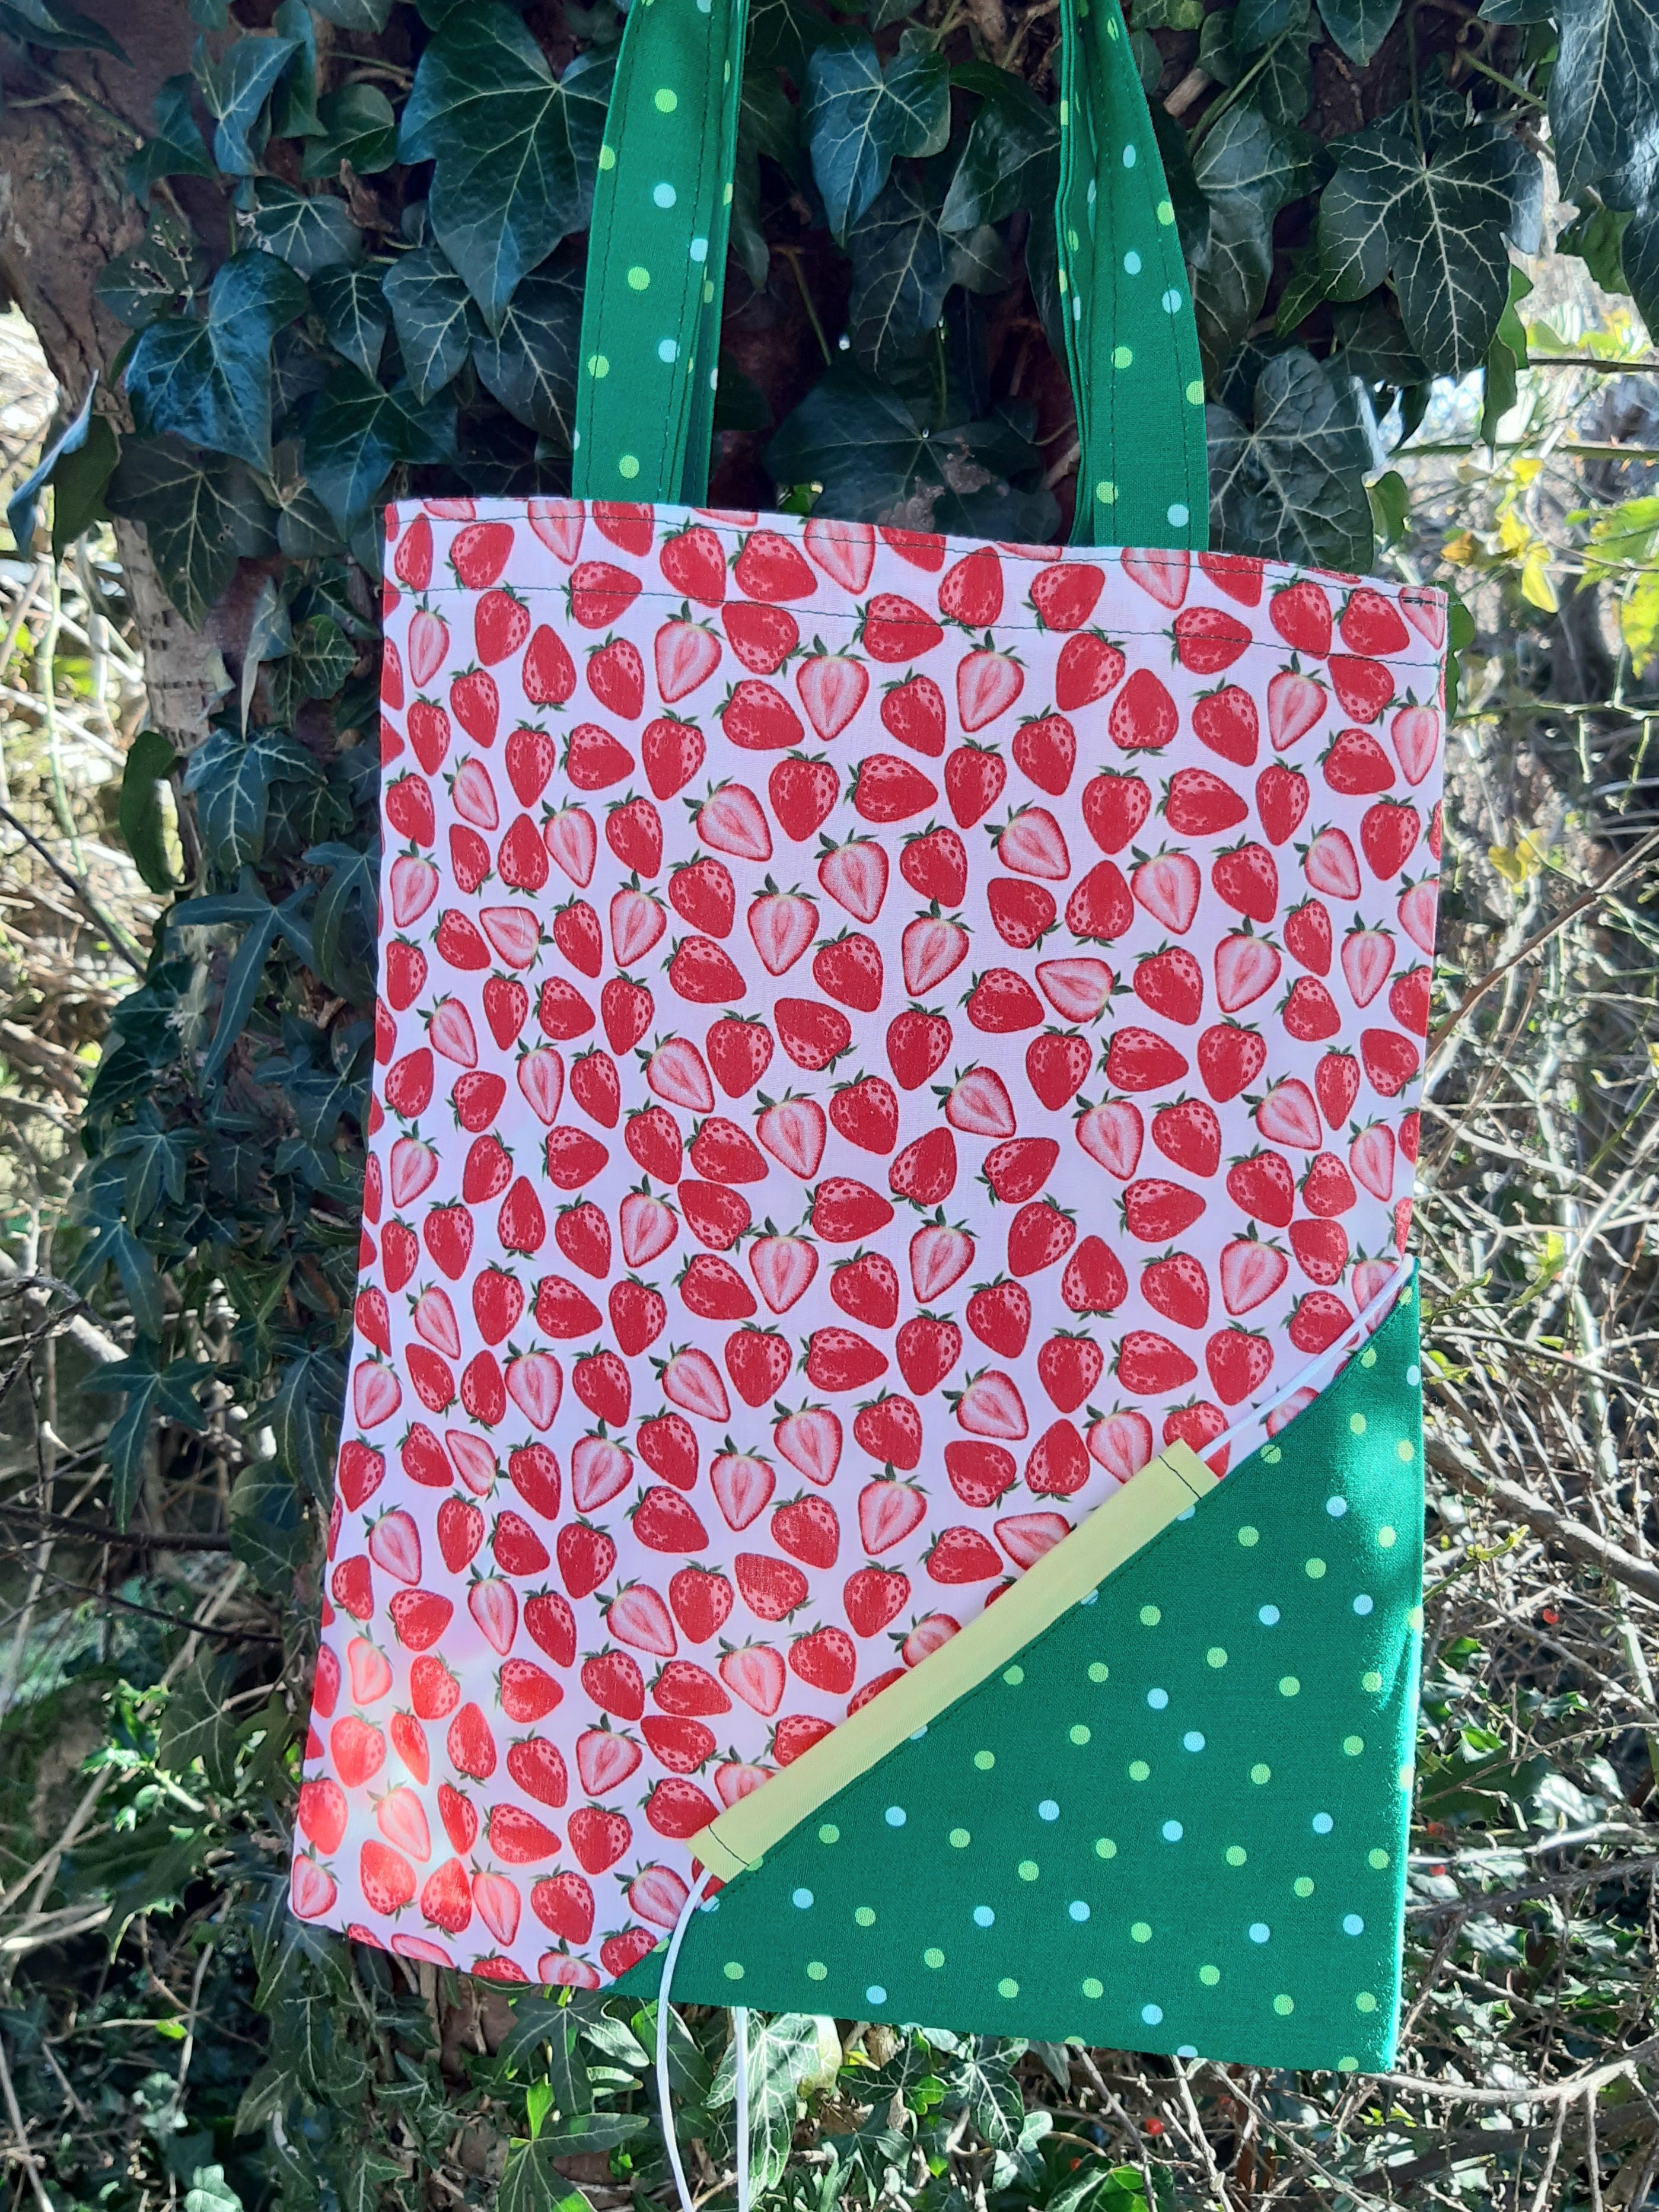 Foldable, reusable shopping bags in a strawberry shaped pouch